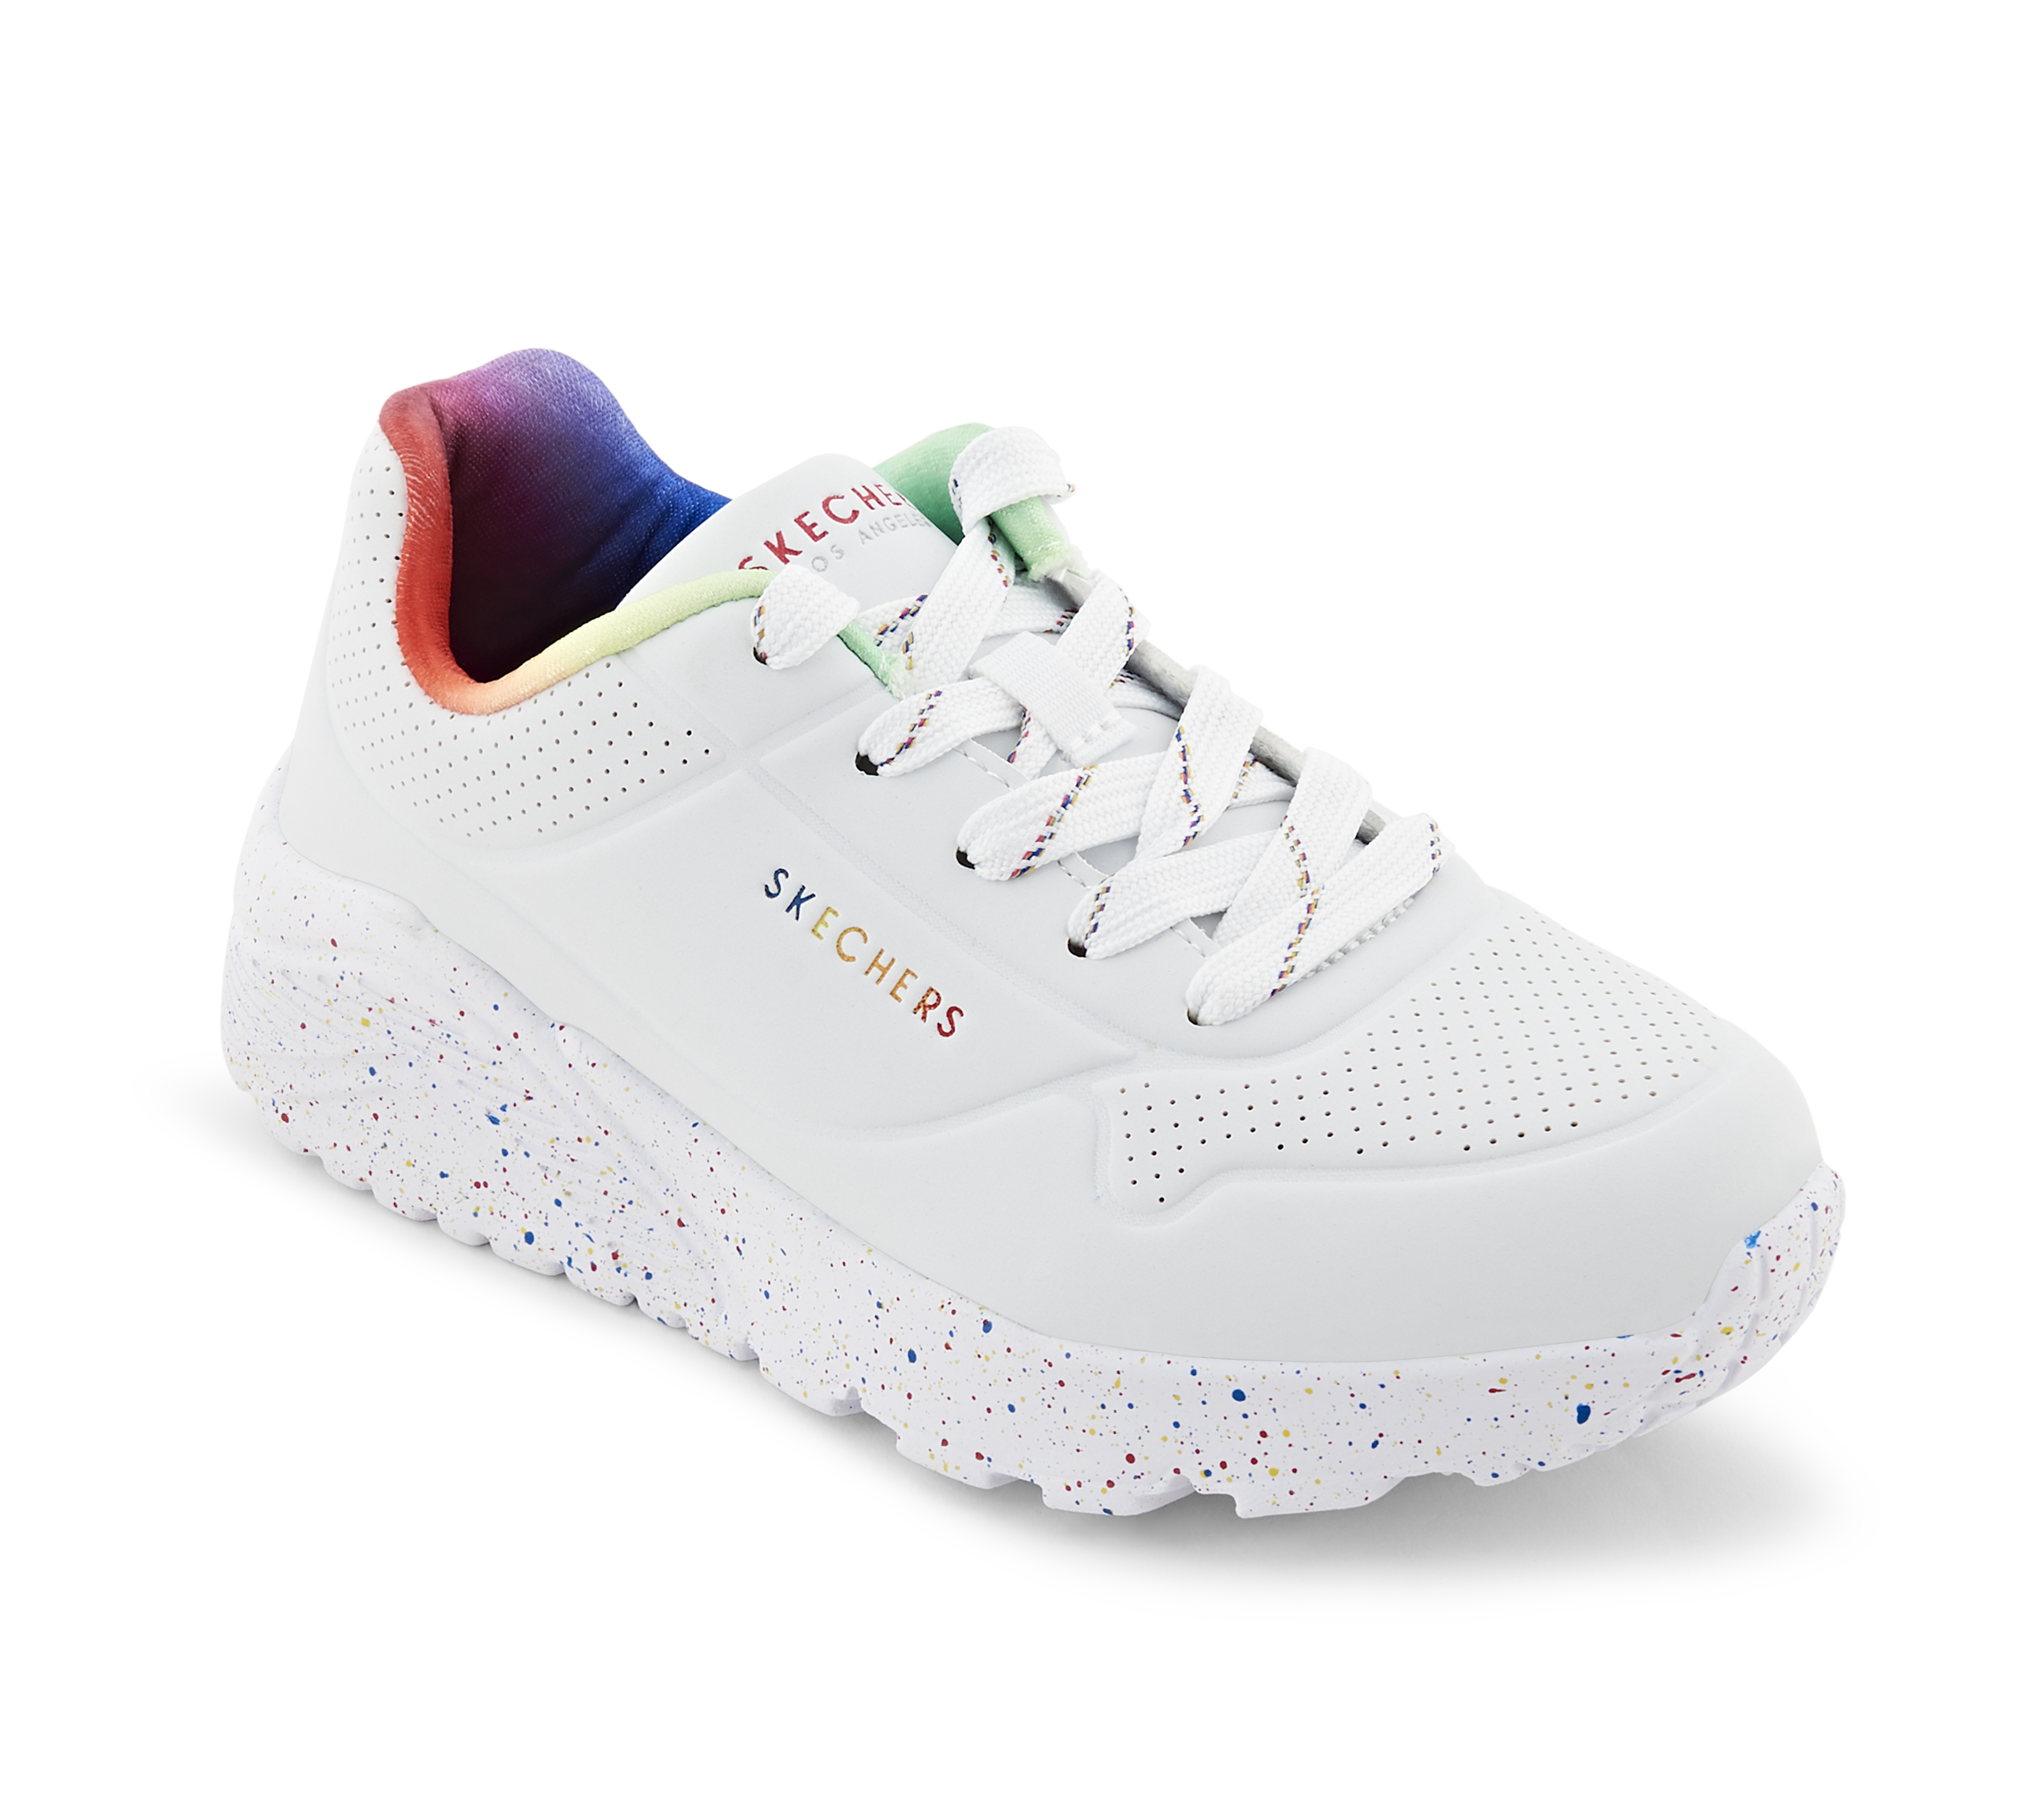 UNO LITE-RAINBOW SPECKLE, WHITE/MULTI Footwear Lateral View